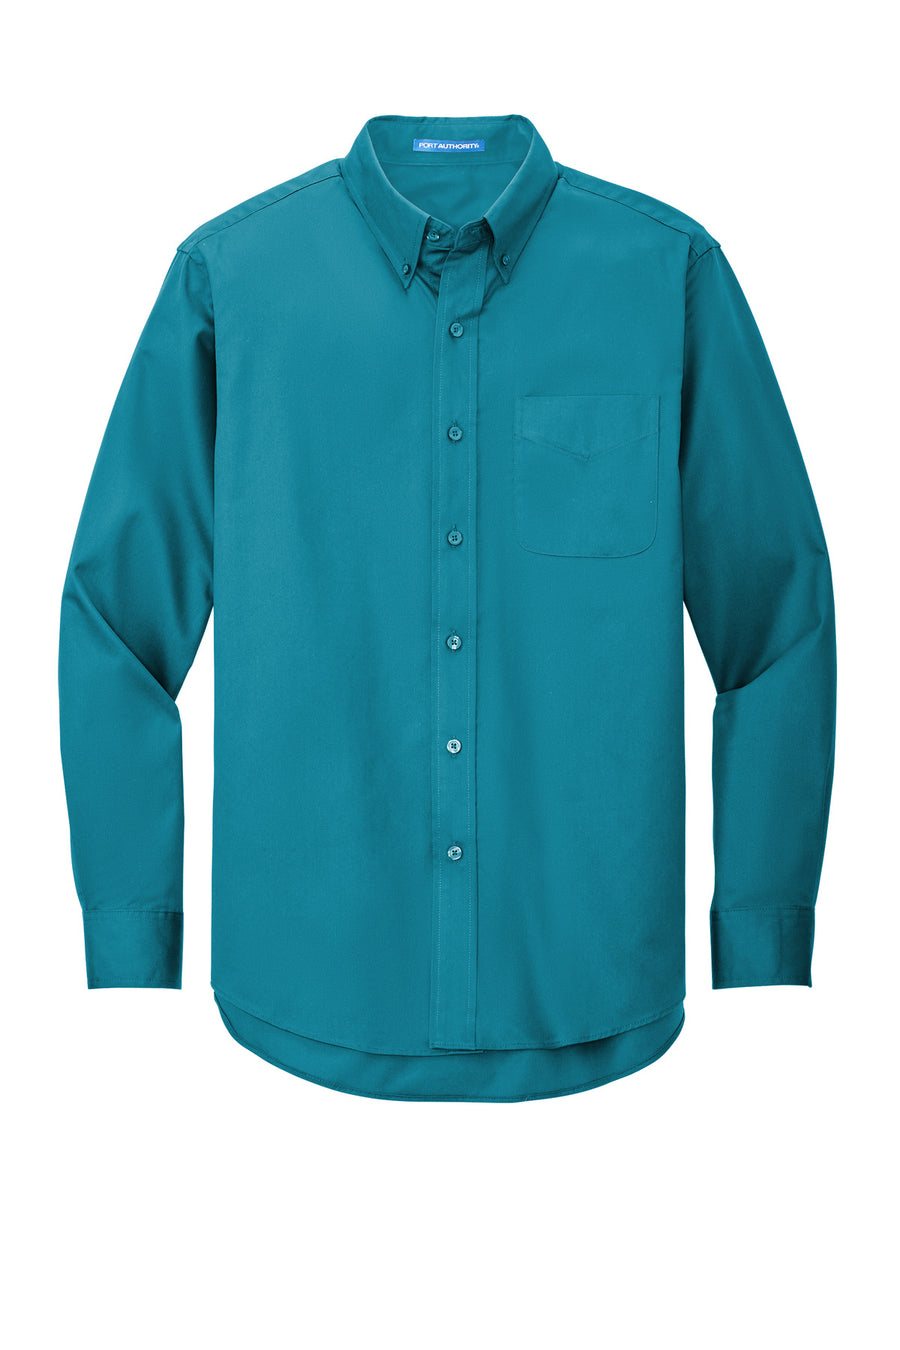 S608-Teal Green-front_flat